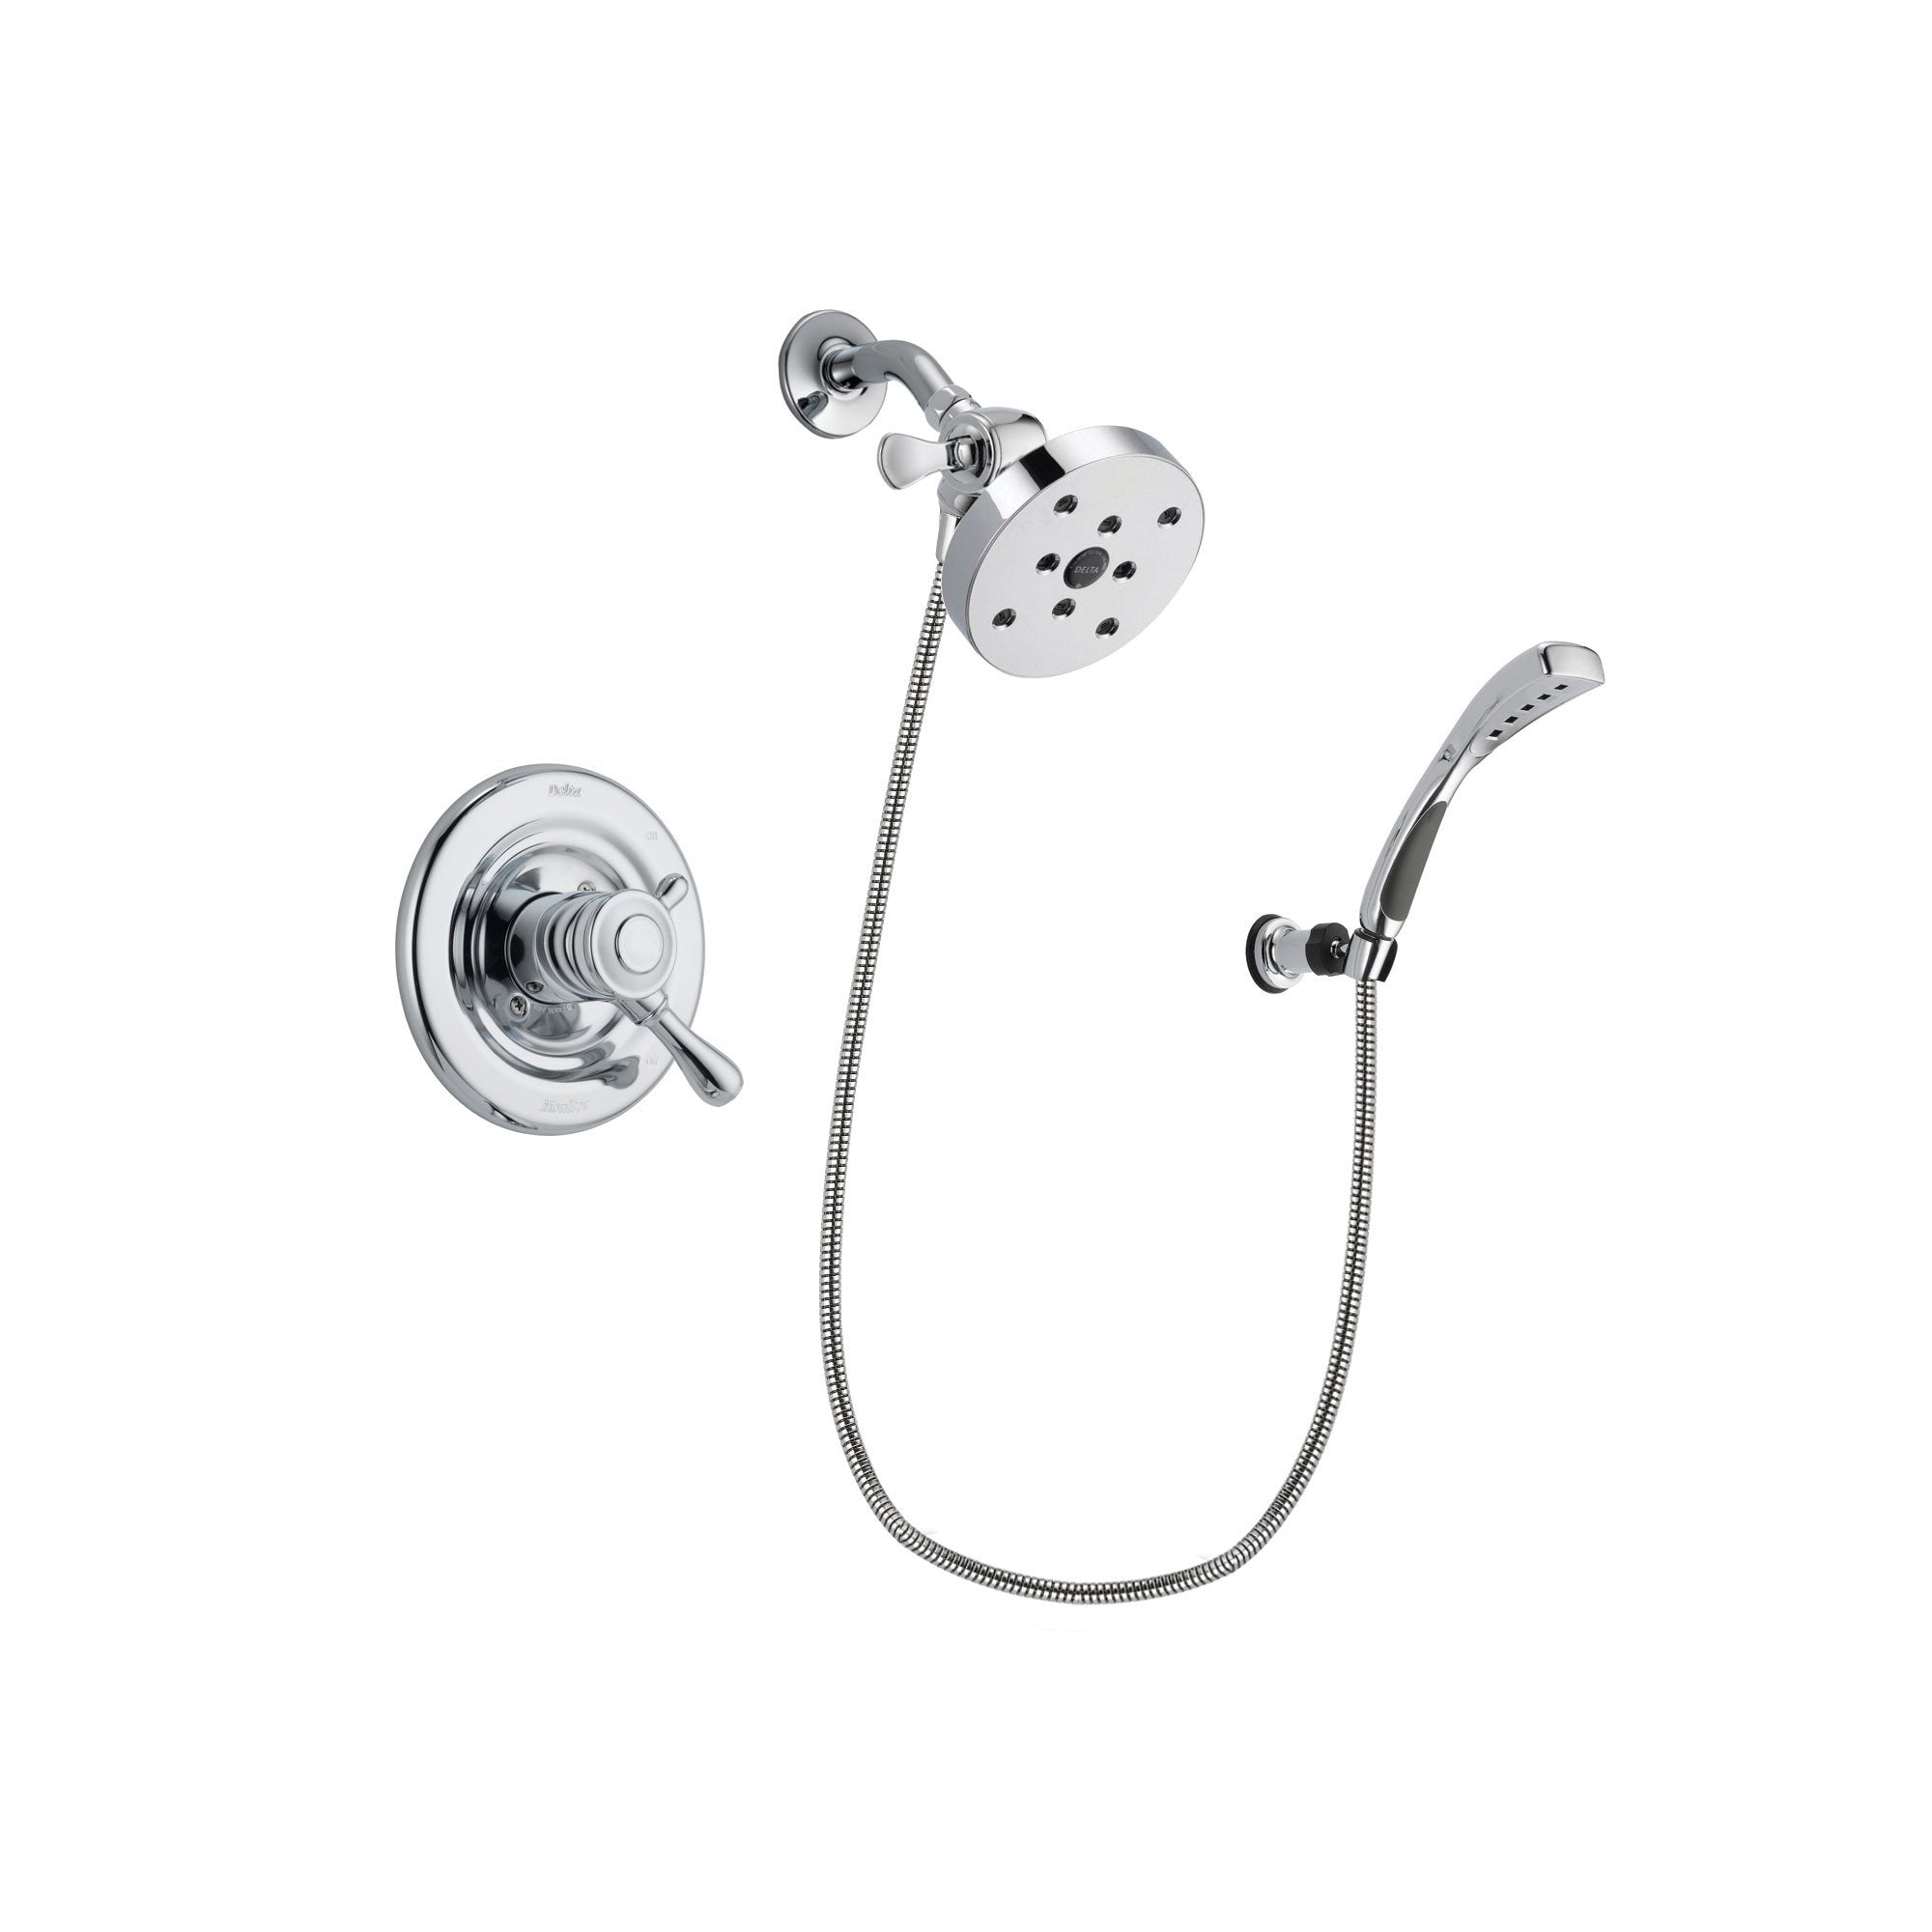 Delta Leland Chrome Finish Dual Control Shower Faucet System Package with 5-1/2 inch Shower Head and Wall-Mount Bracket with Handheld Shower Spray Includes Rough-in Valve DSP1098V